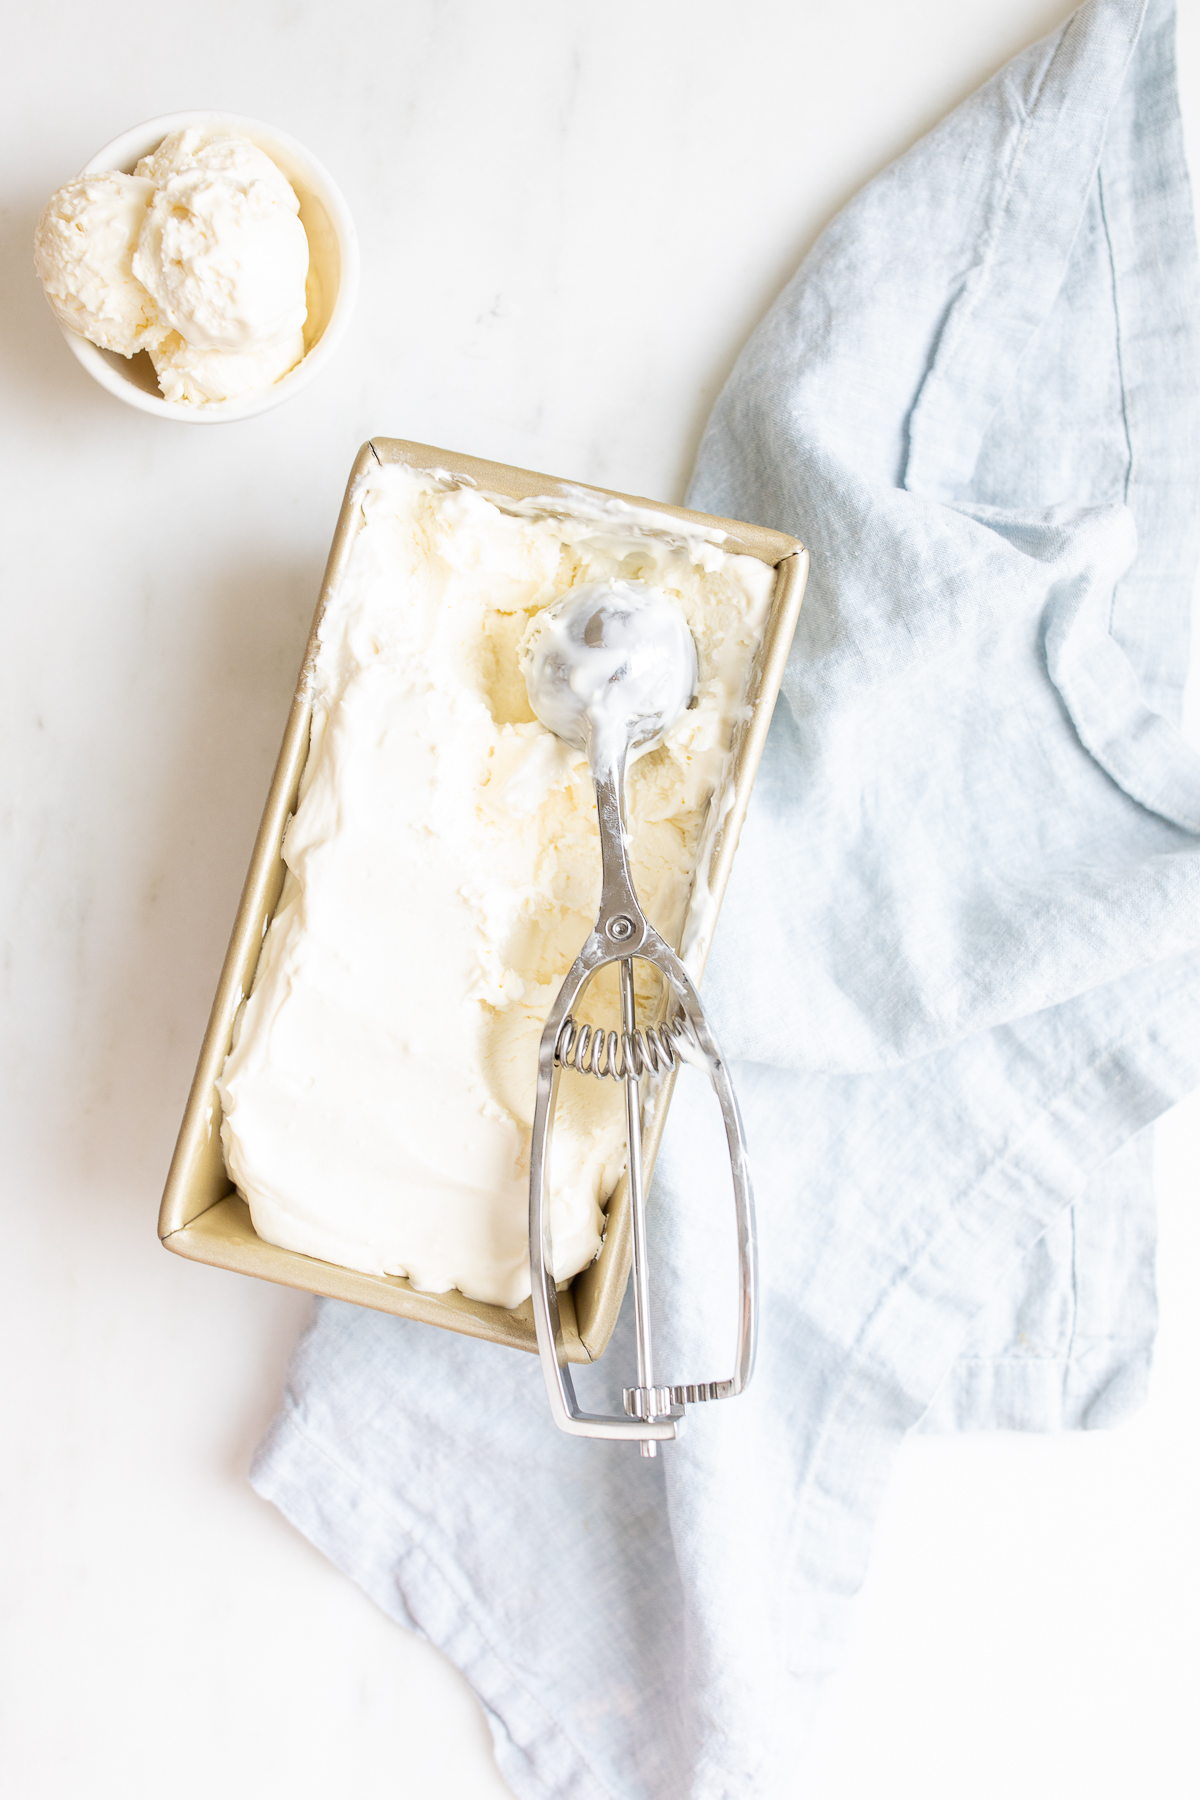 cream cheese ice cream in a loaf pan with an ice cream scooper and small white bowl of ice cream